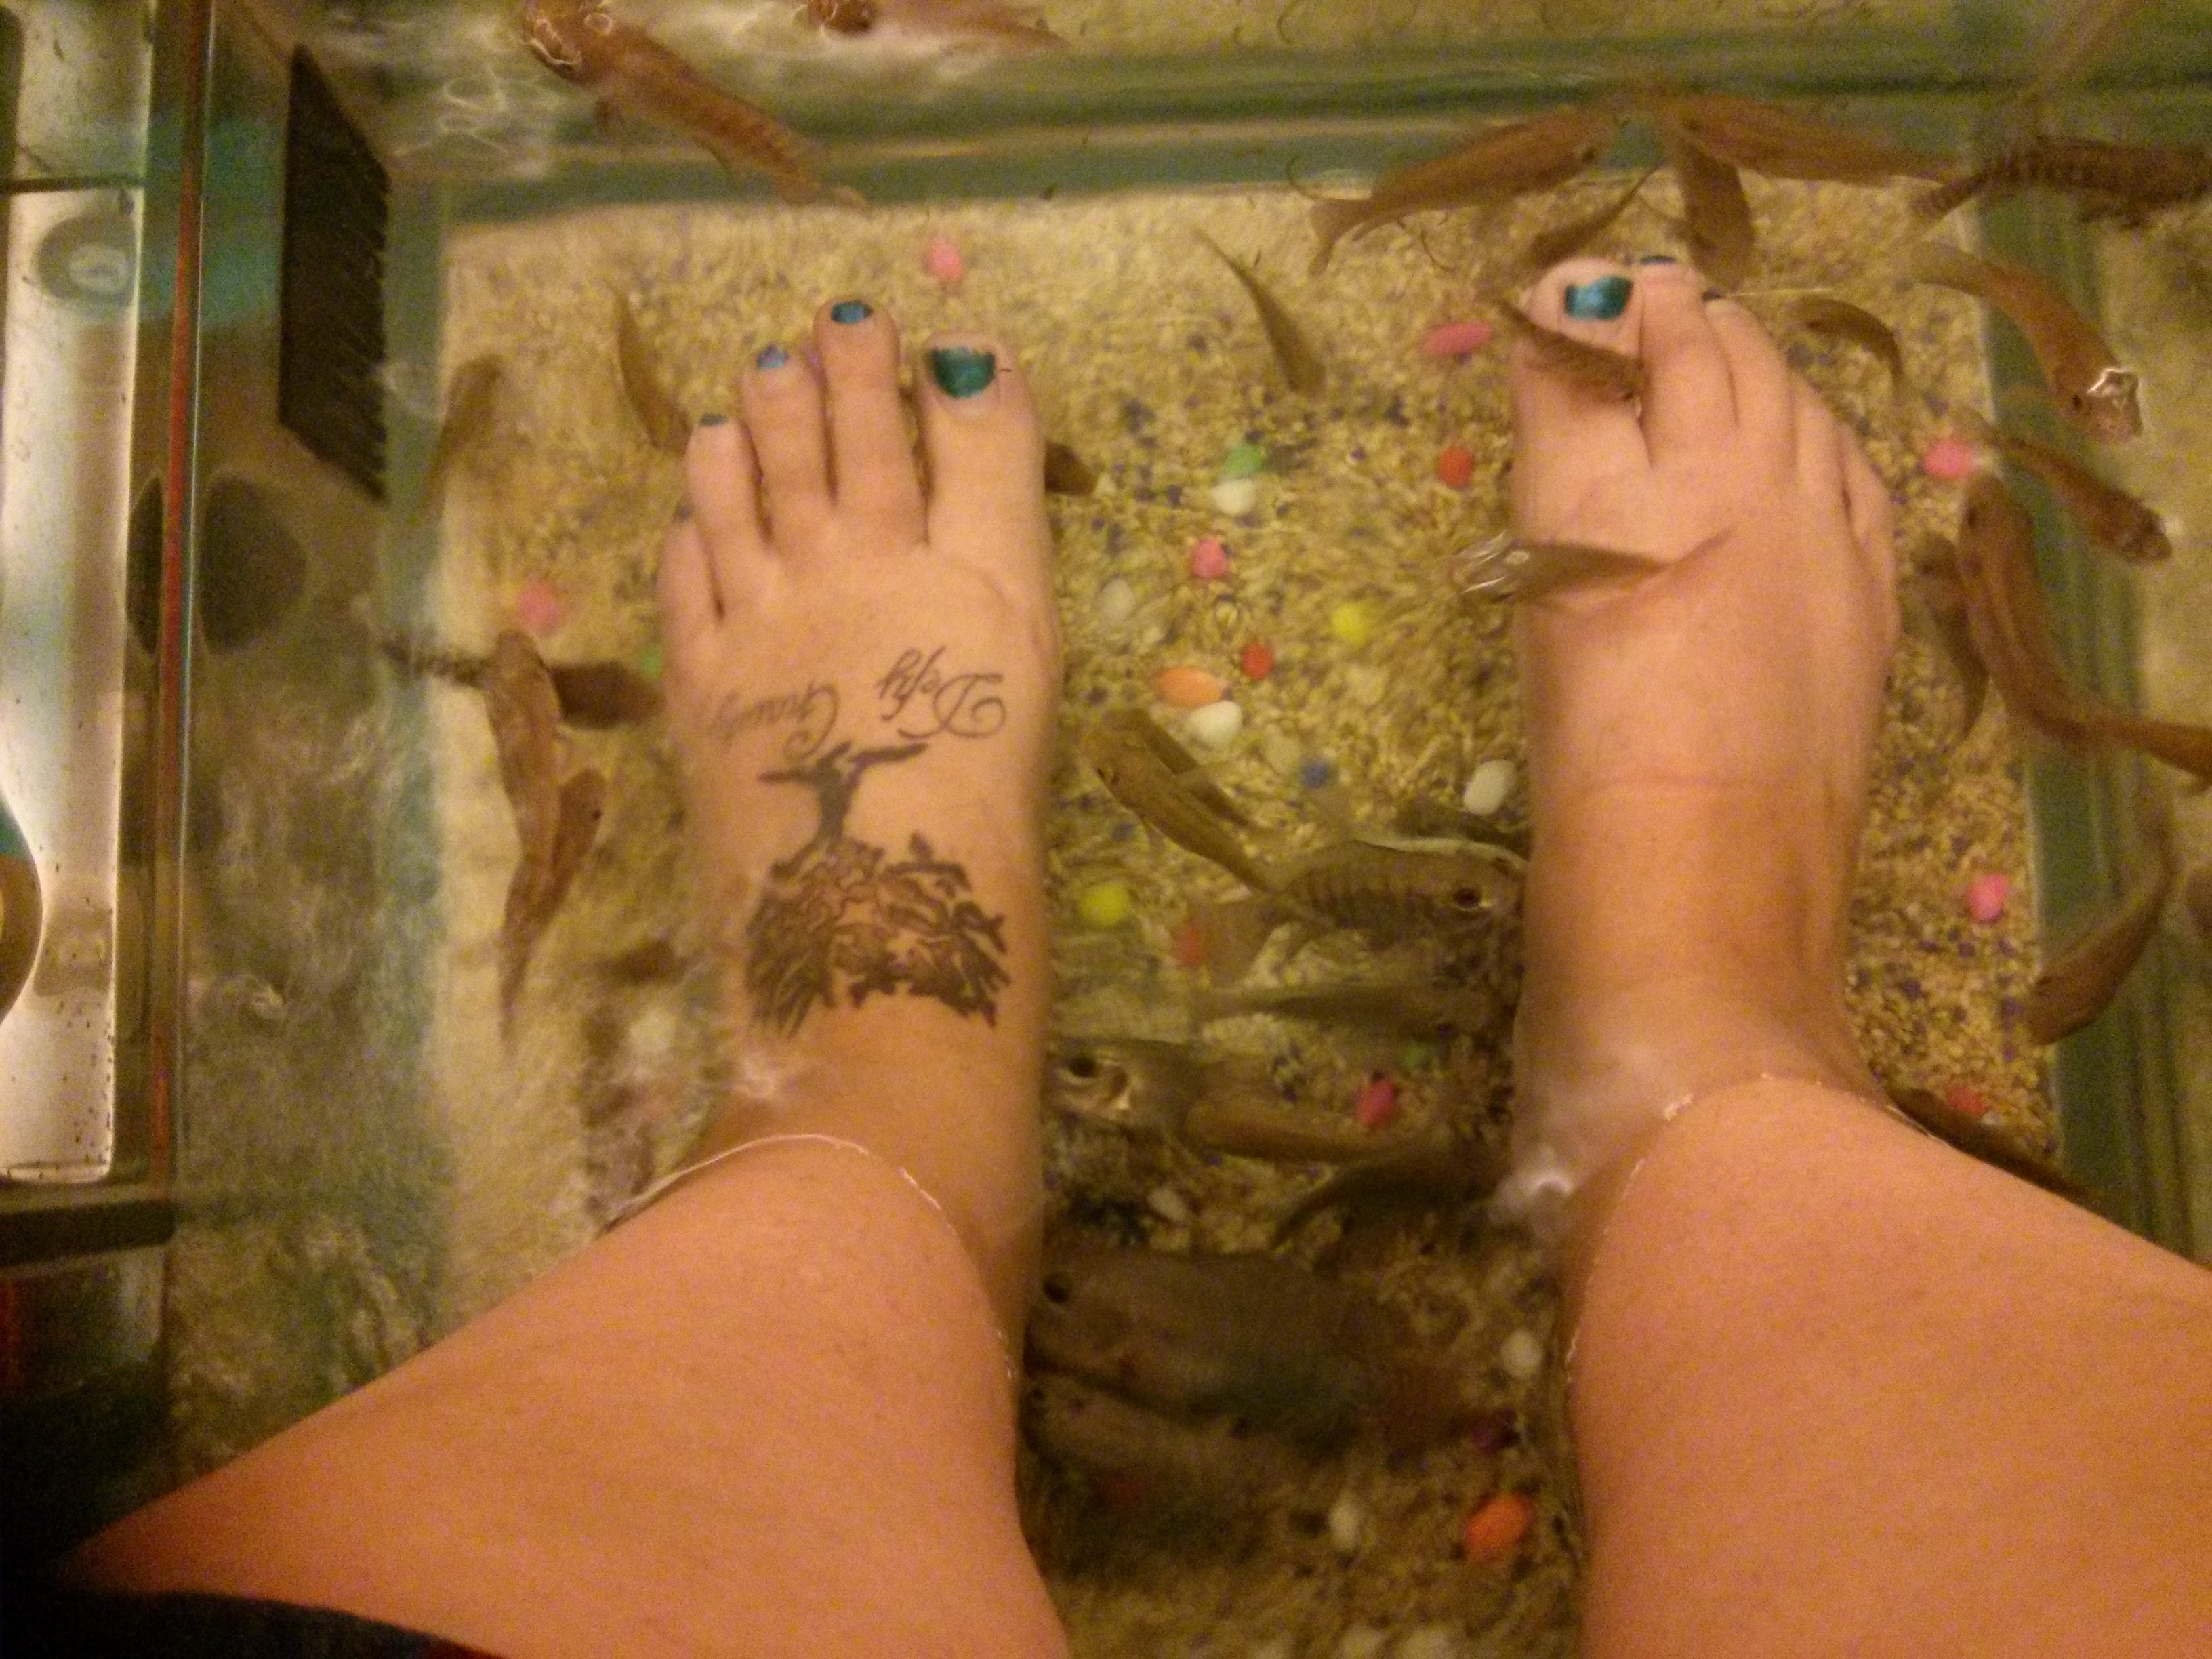 These little fish eat the dead skin on your feet.  It tickles like CRAZY at first, but once the nerves in your feet calm down, it's pretty cool.  This was definitely the most interesting pedicure I've ever received!